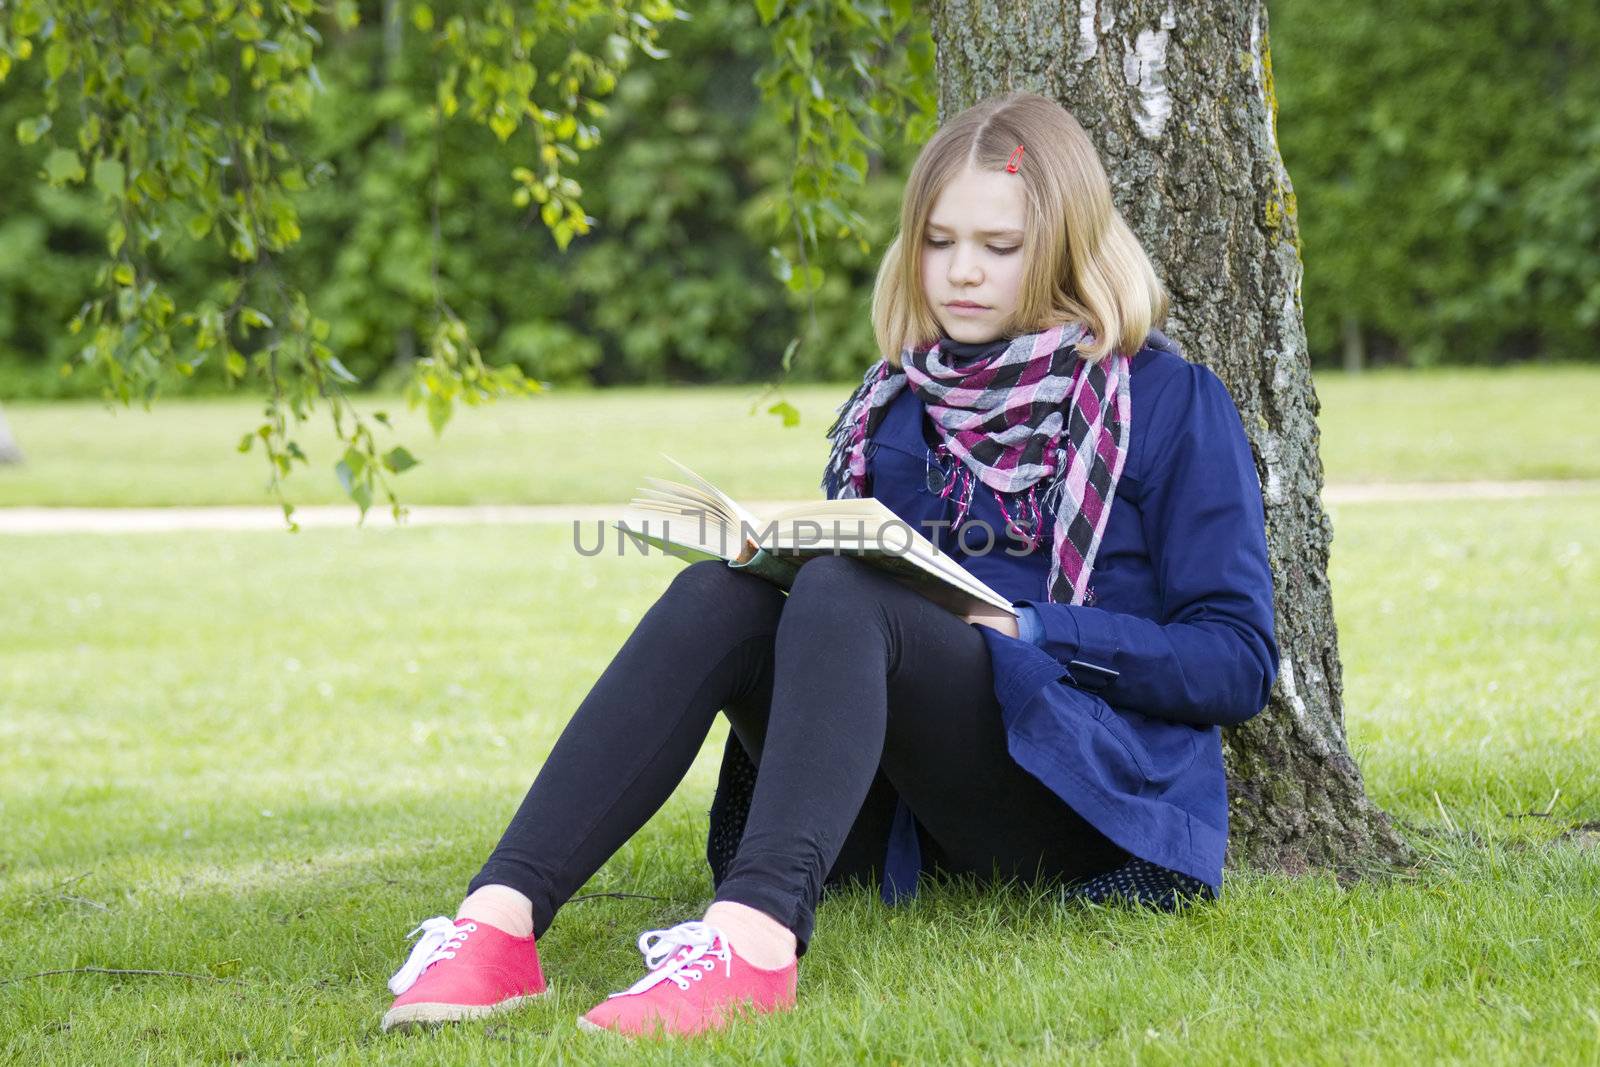 Young girl reading book in park in spring day  by miradrozdowski